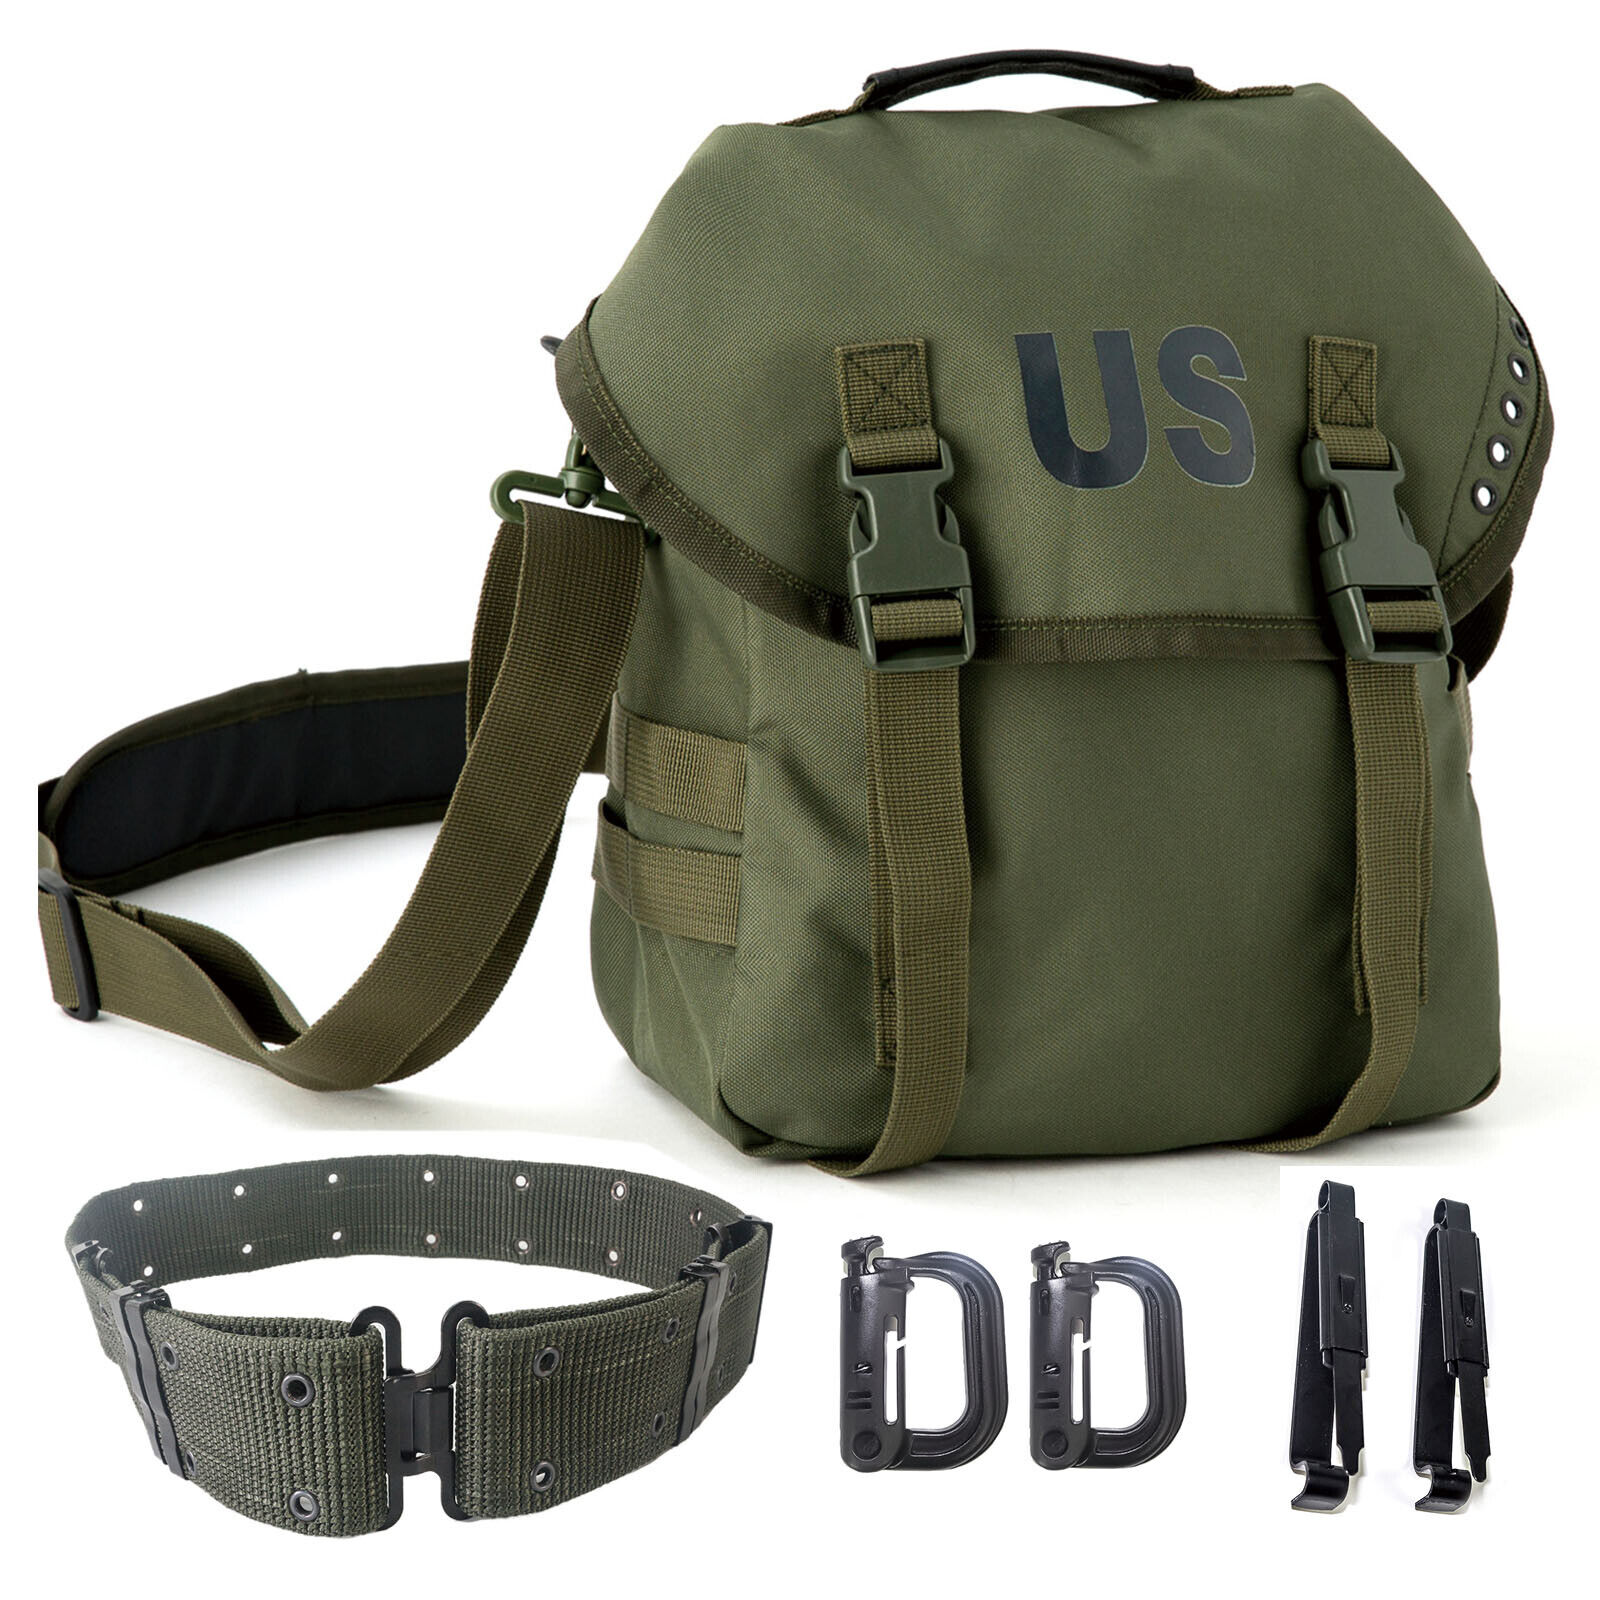 Military Army Tactical Modular Alice Butt Pack Messenger Bag Backpack Olive Drab